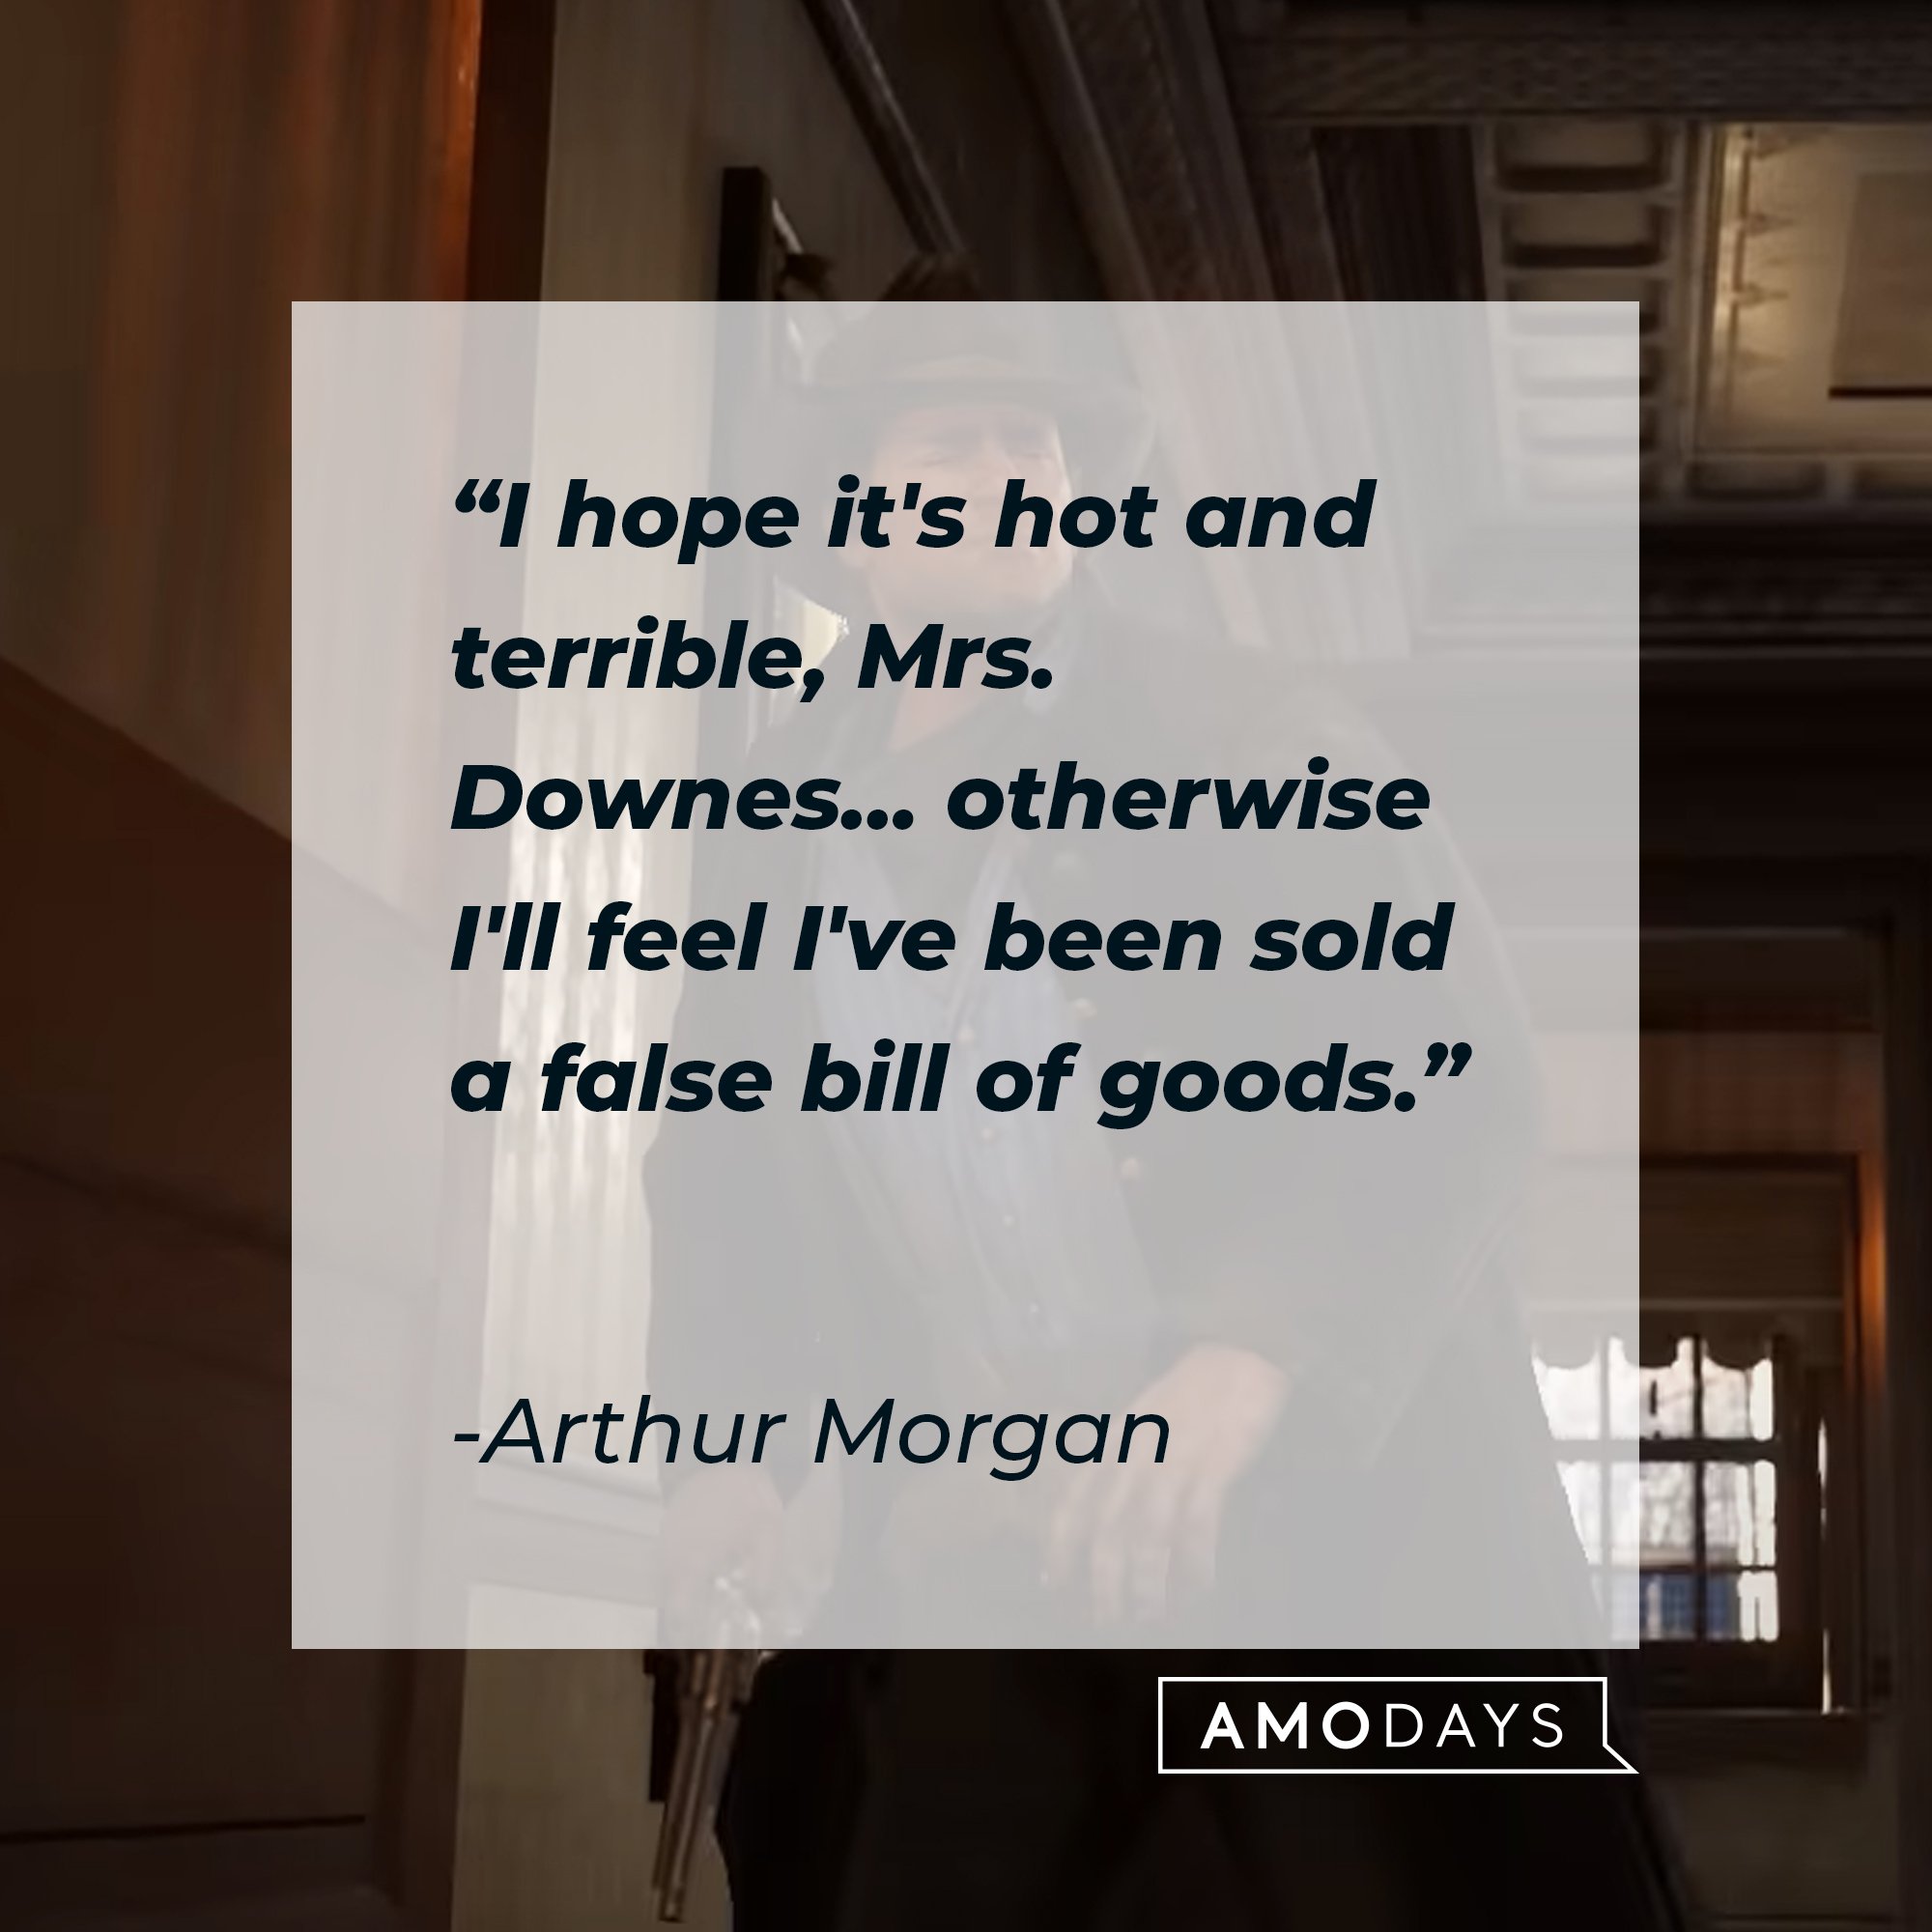 Arthur Morgan's quote: "I hope it's hot and terrible, Mrs. Downes… otherwise I'll feel I've been sold a false bill of goods." | Image: AmoDays